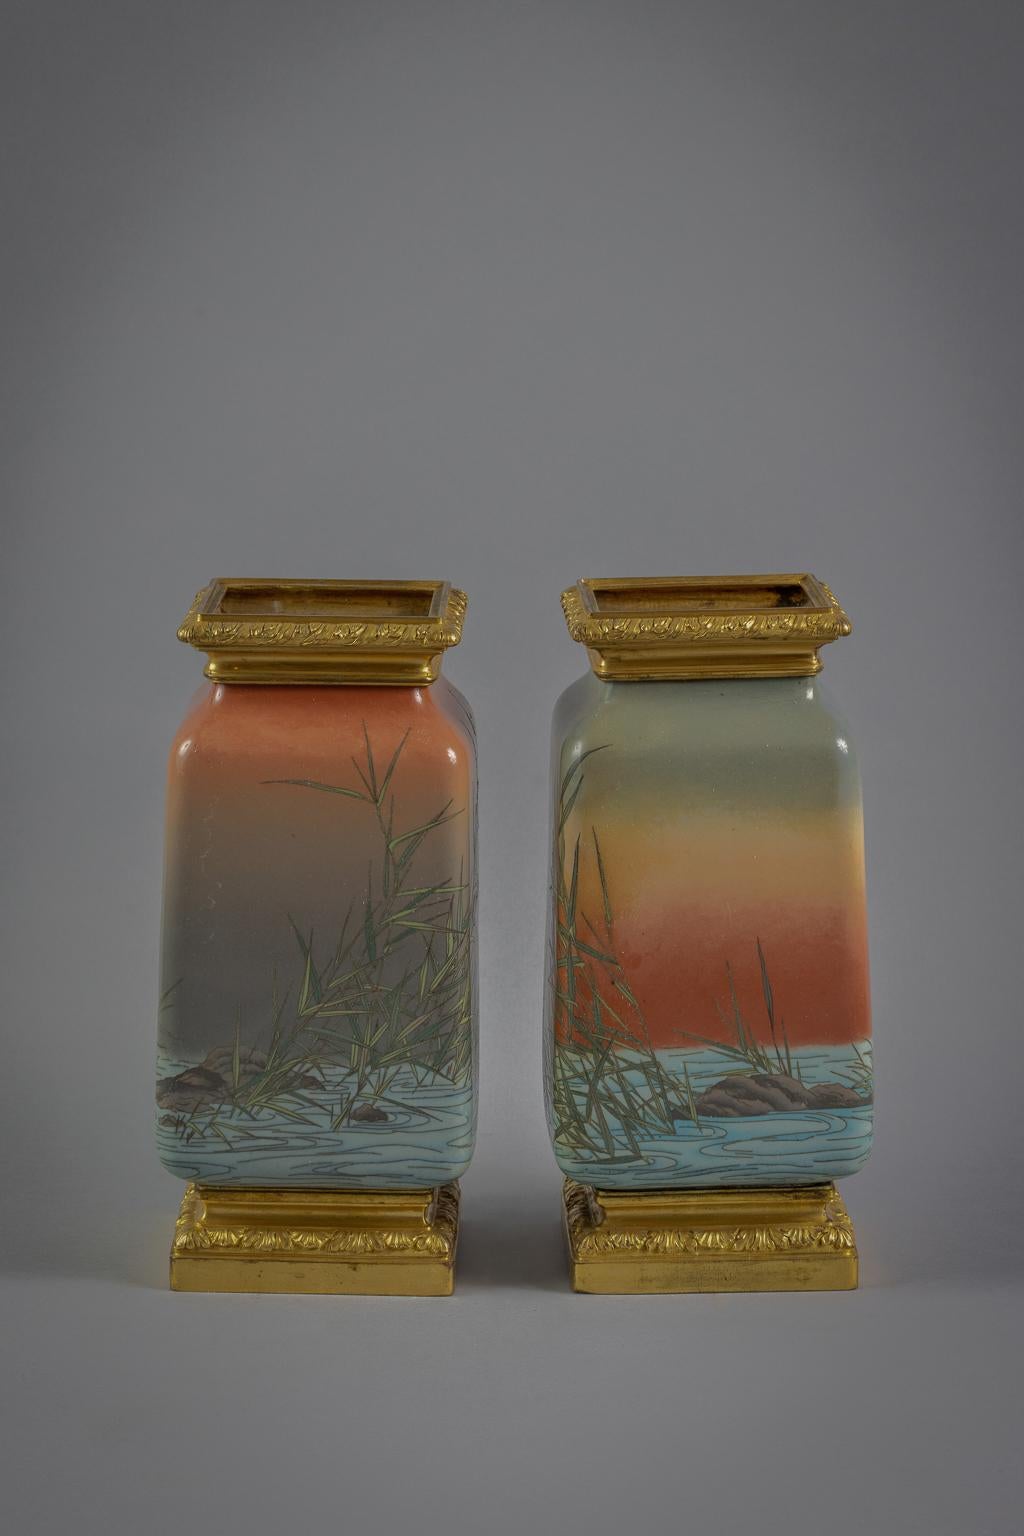 Pair of Bronze Mounted Japanese Cloisonné Vases, circa 1875 In Good Condition For Sale In New York, NY